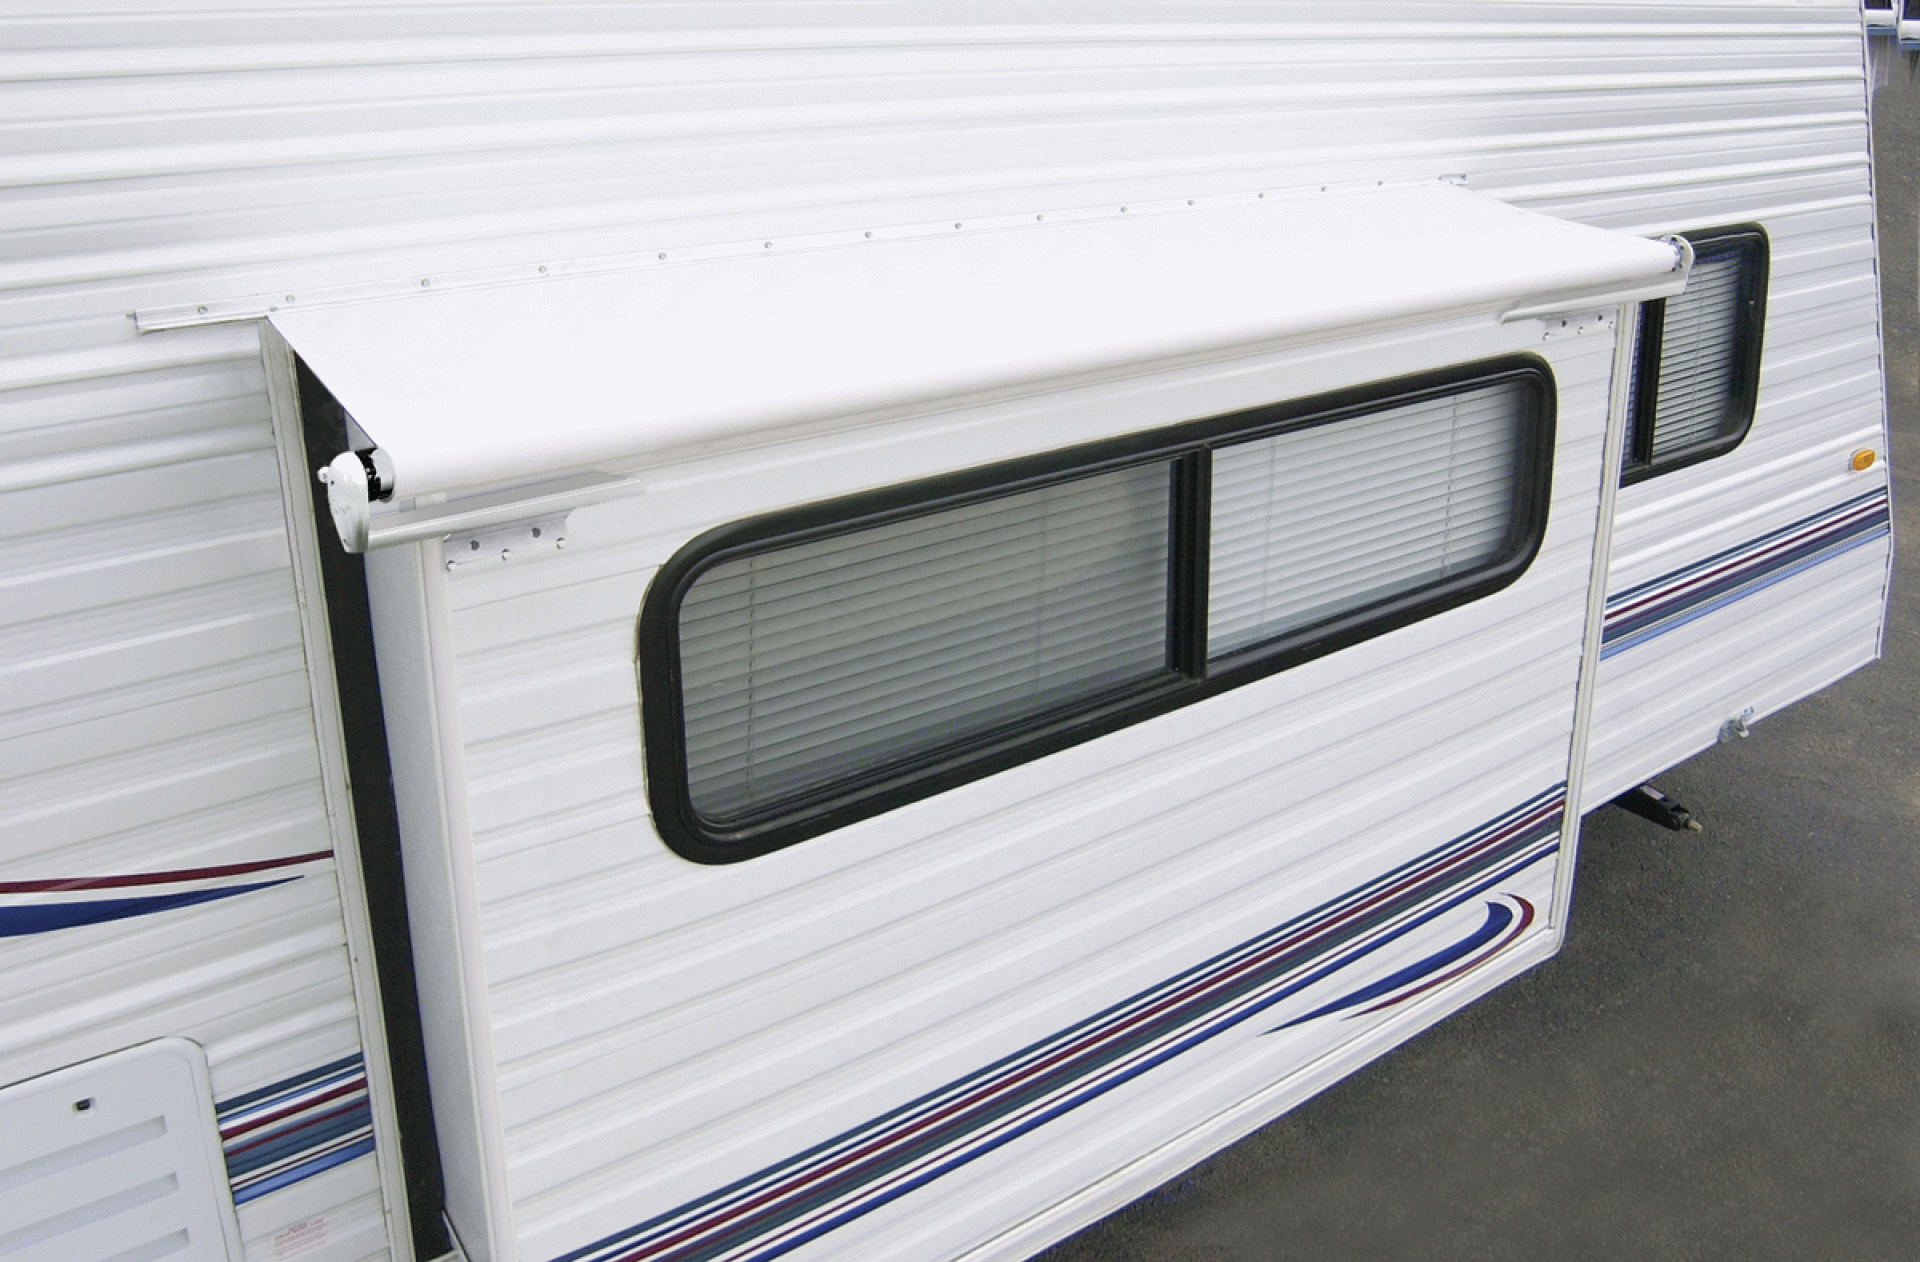 CAREFREE OF COLORADO | LH1130042 | SLIDEOUT COVER AWNING 106" - 113.9" ROOF RANGE WHITE VINYL